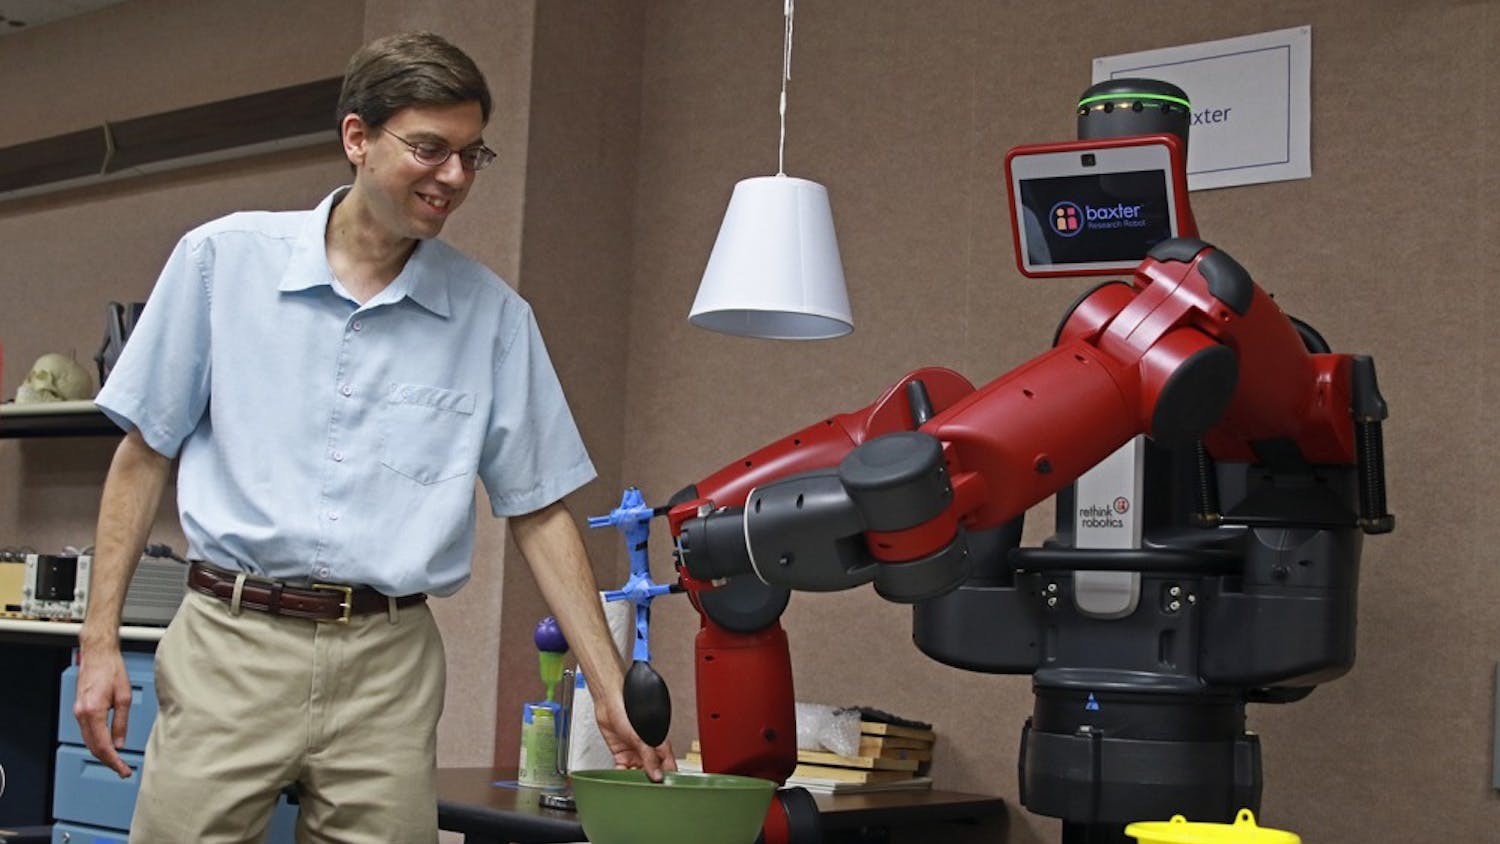 Professor Ron Alterovitz demonstrates the functions of one of the robots he and his students programmed.